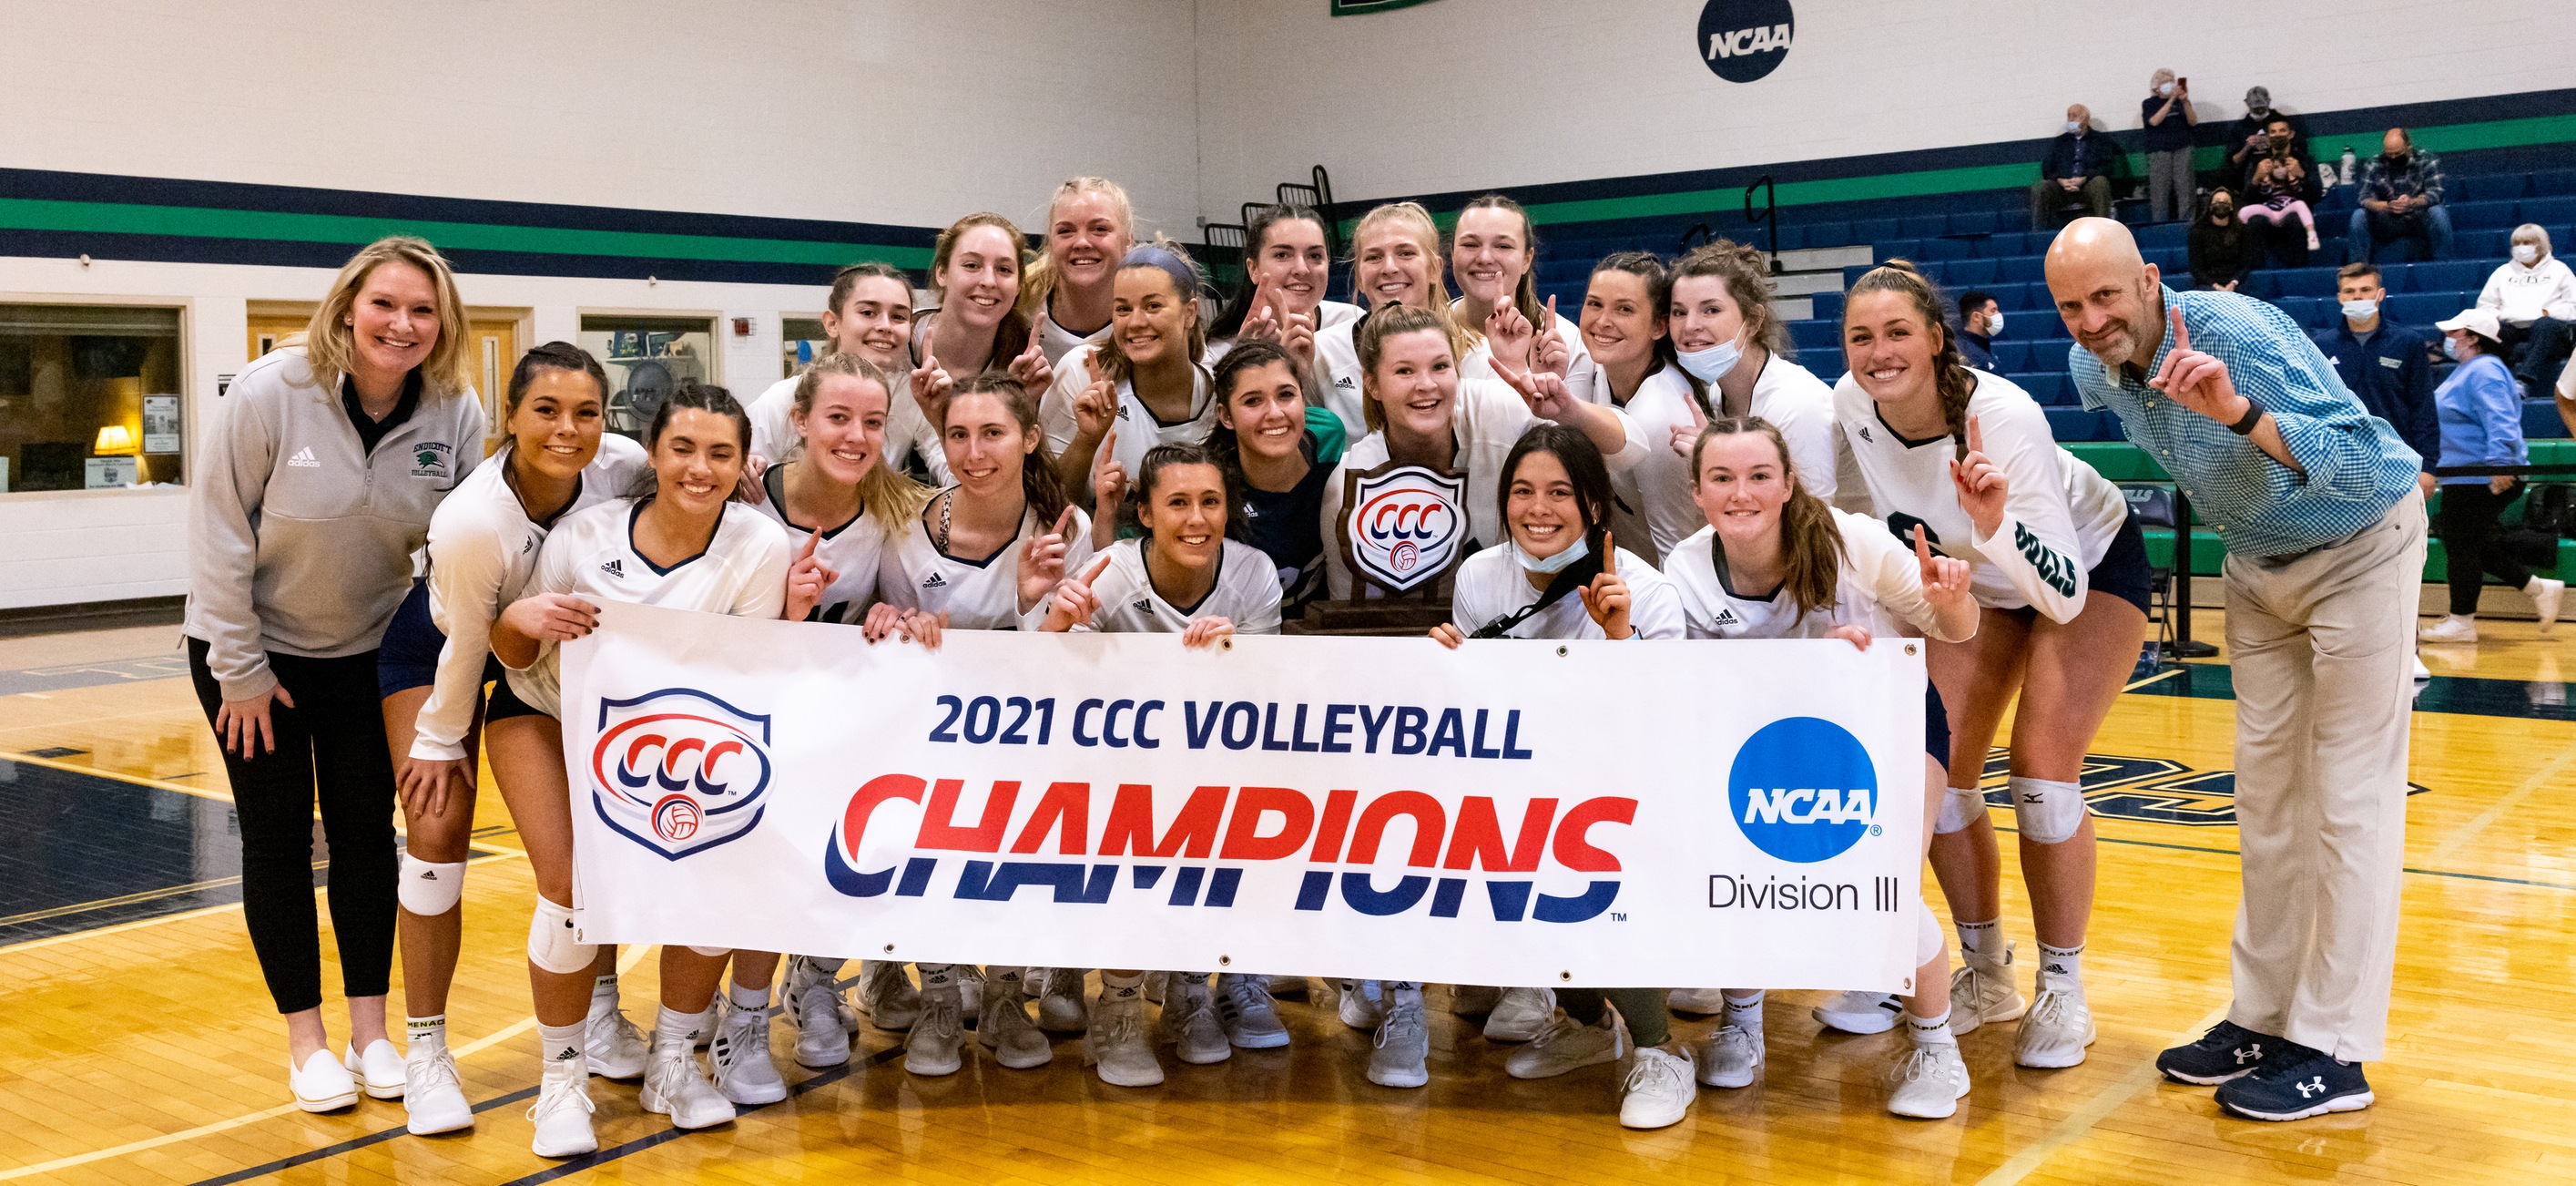 The Endicott women's volleyball student-athletes and coaches pose with the CCC banner and trophy following their 3-1 win over Roger Williams in the 2021 CCC championship.